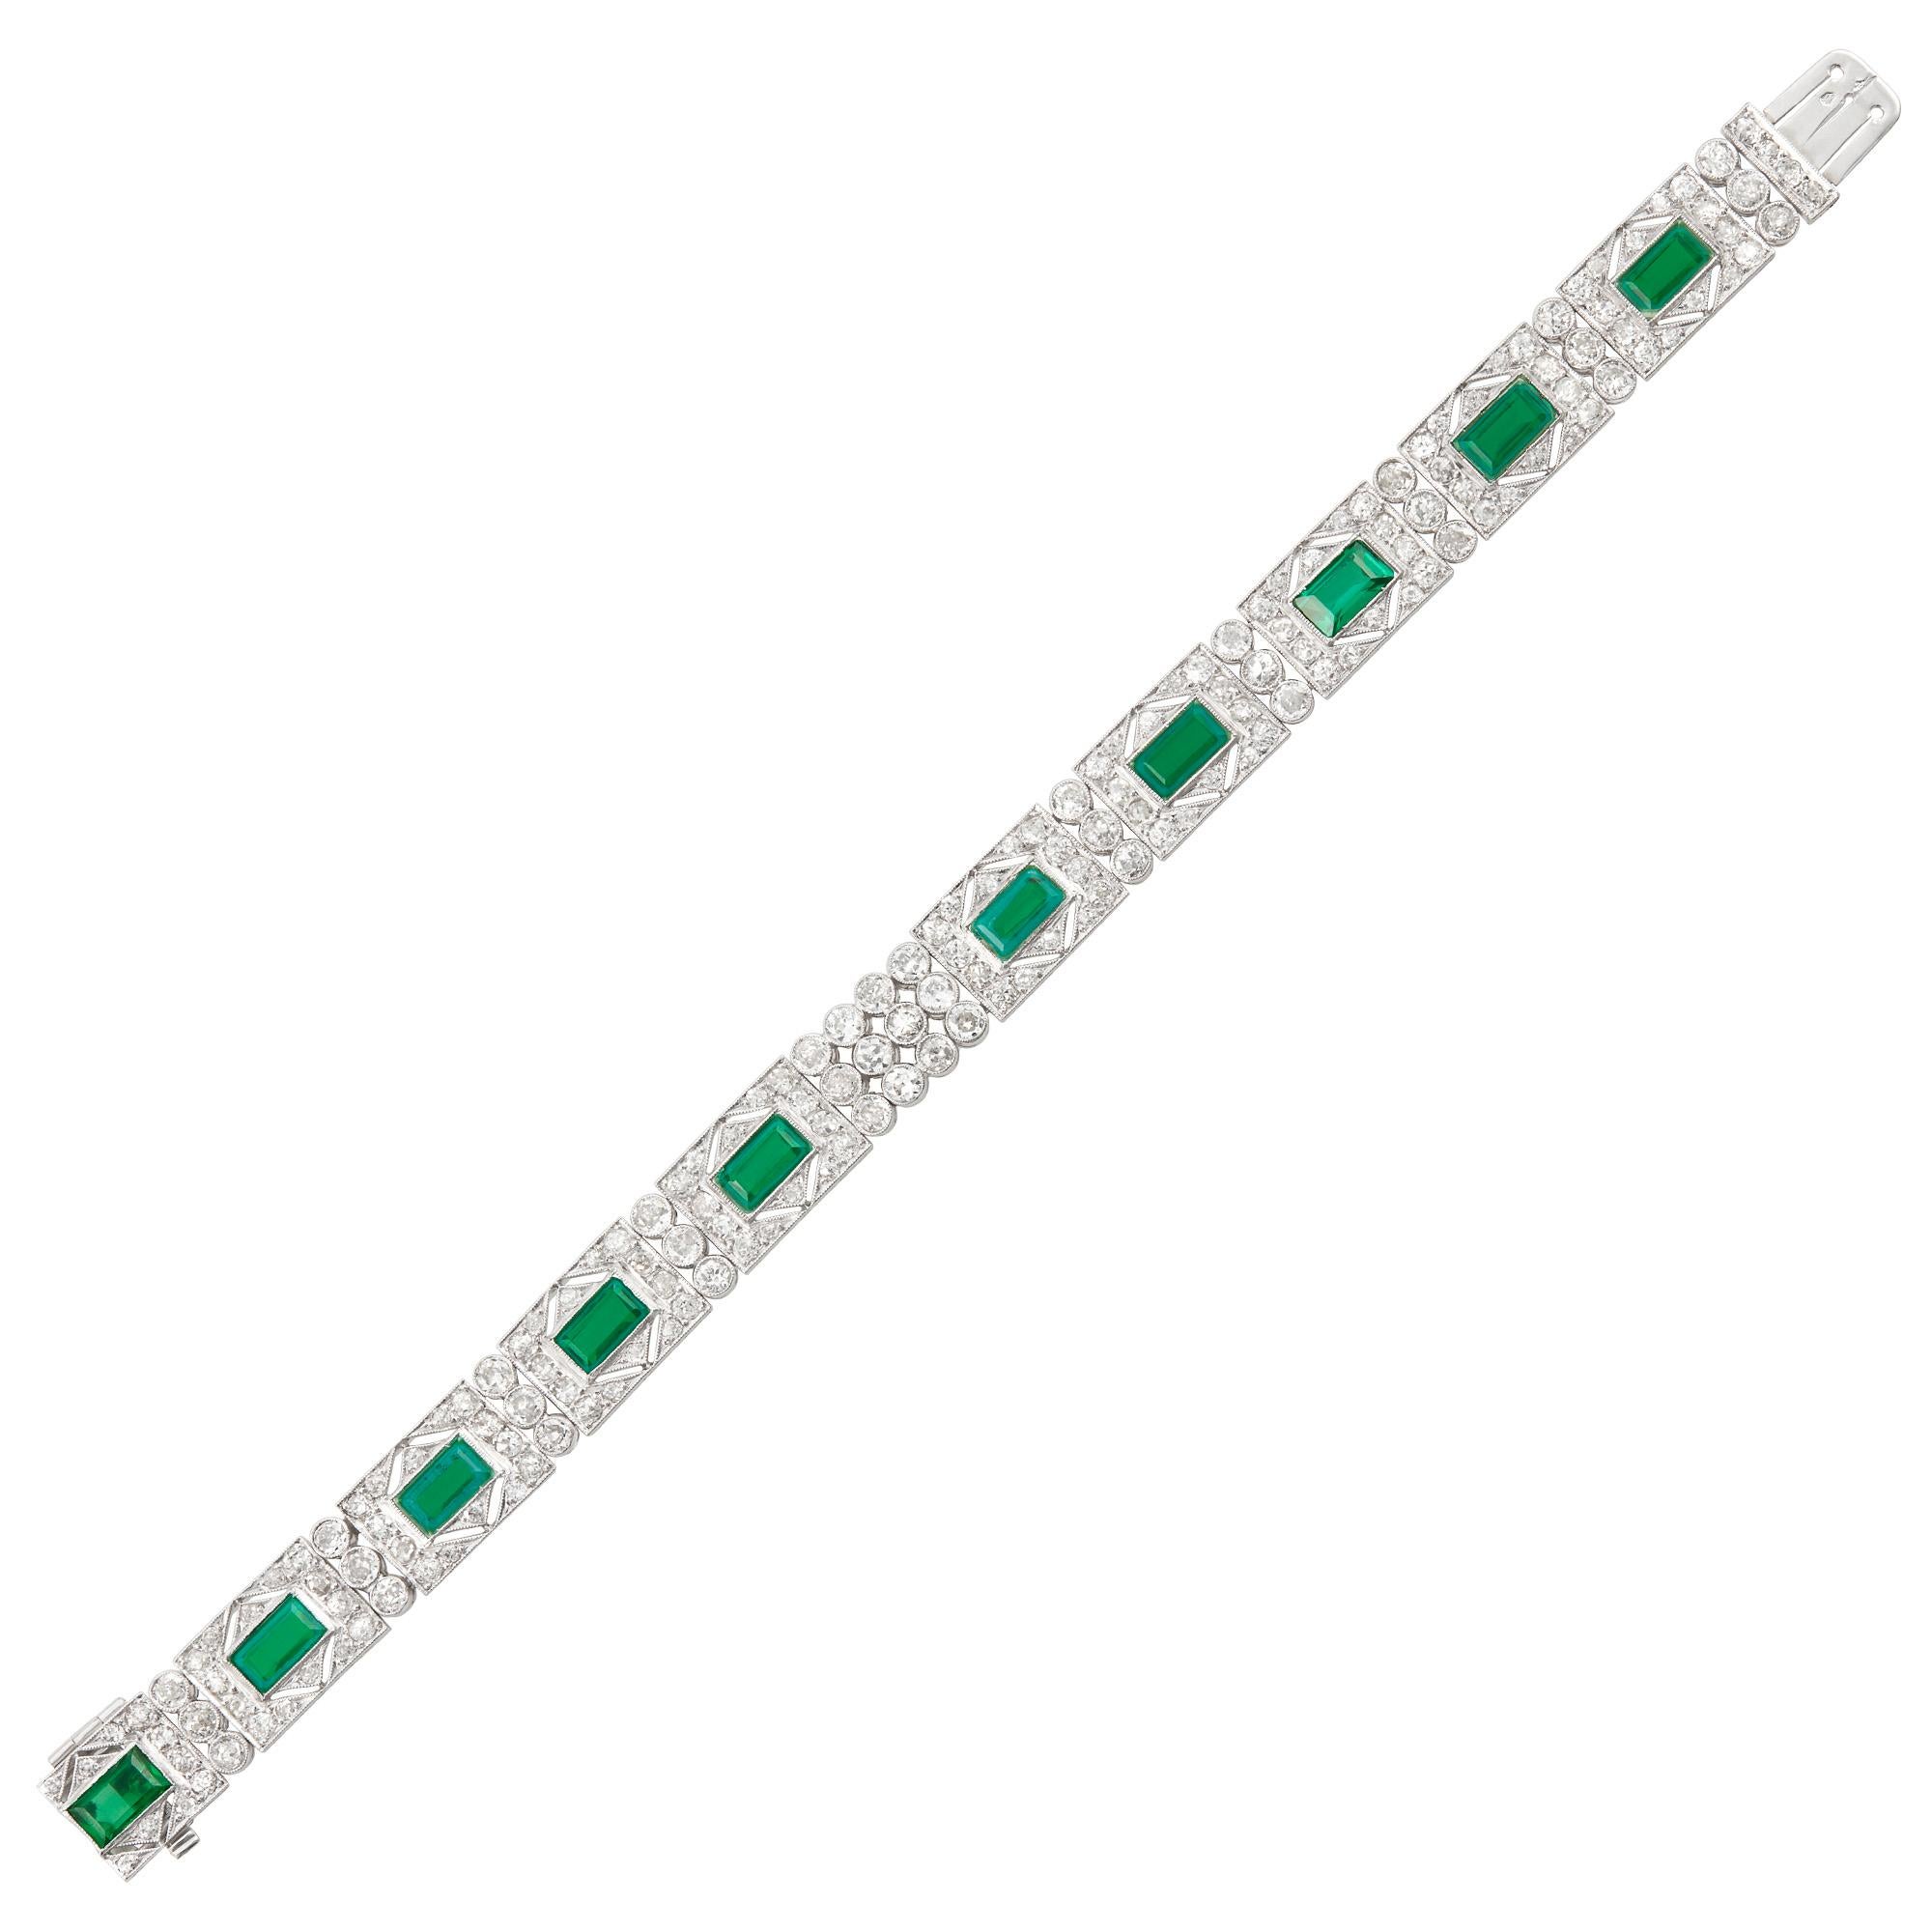 179 old European & single-cut diamonds ap. 7.40 cts., 10 rectangular-shaped simulated emeralds, with French assay marks, c. 1930, ap. 19.4 dwts. Length 7 1/4 inches. 

SKU#B-01844
